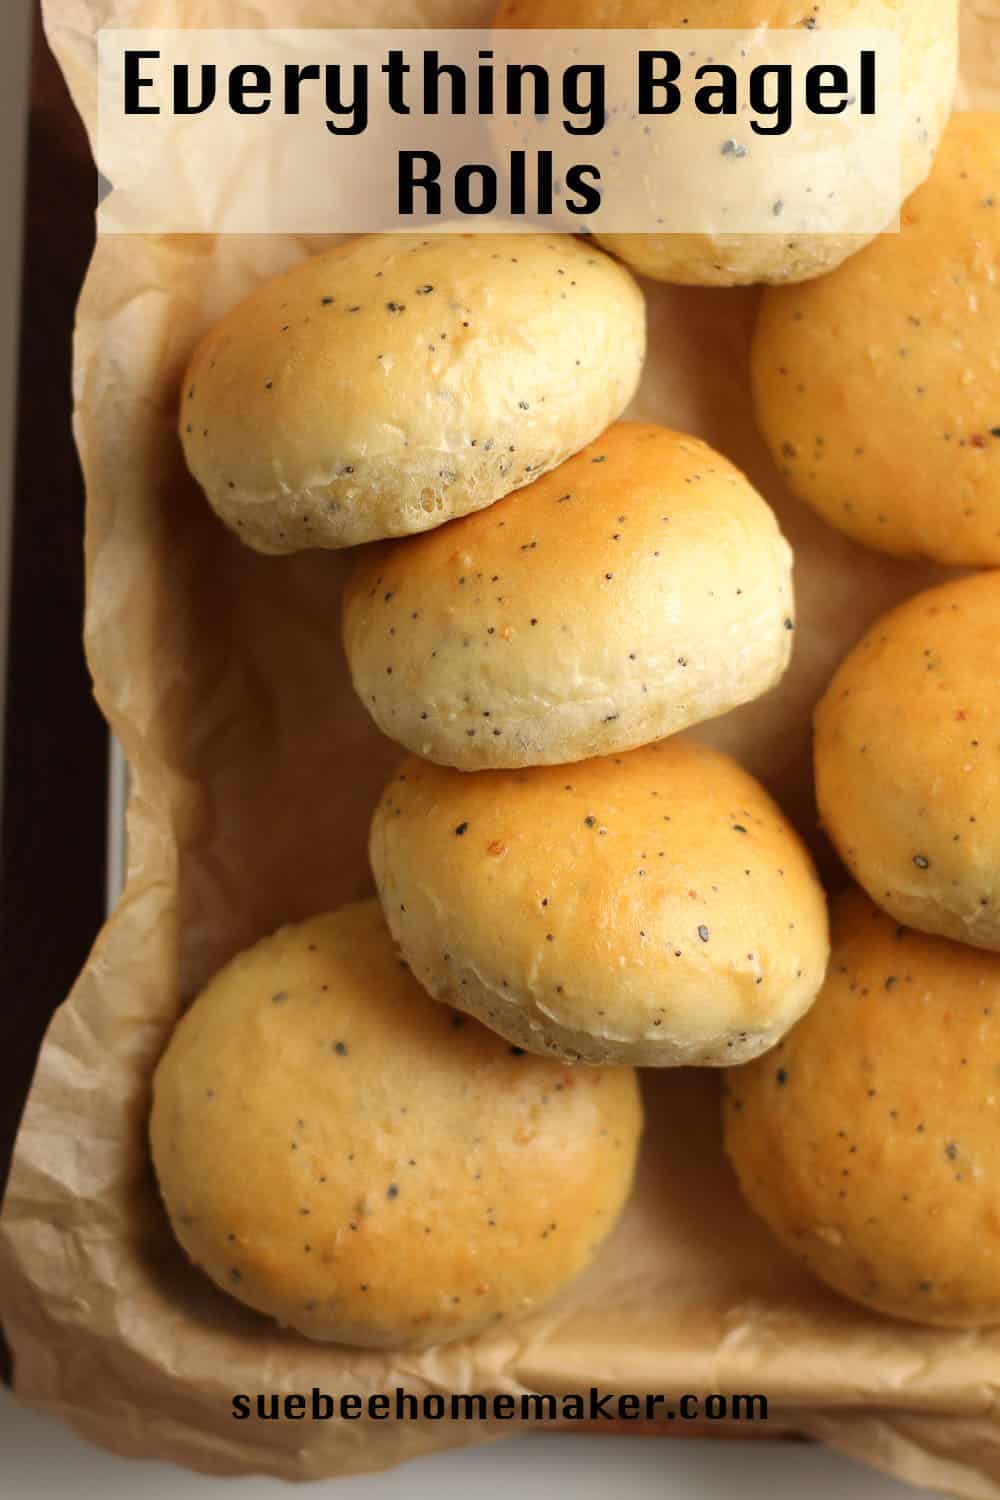 Some freshly baked rolls on a baking sheet.